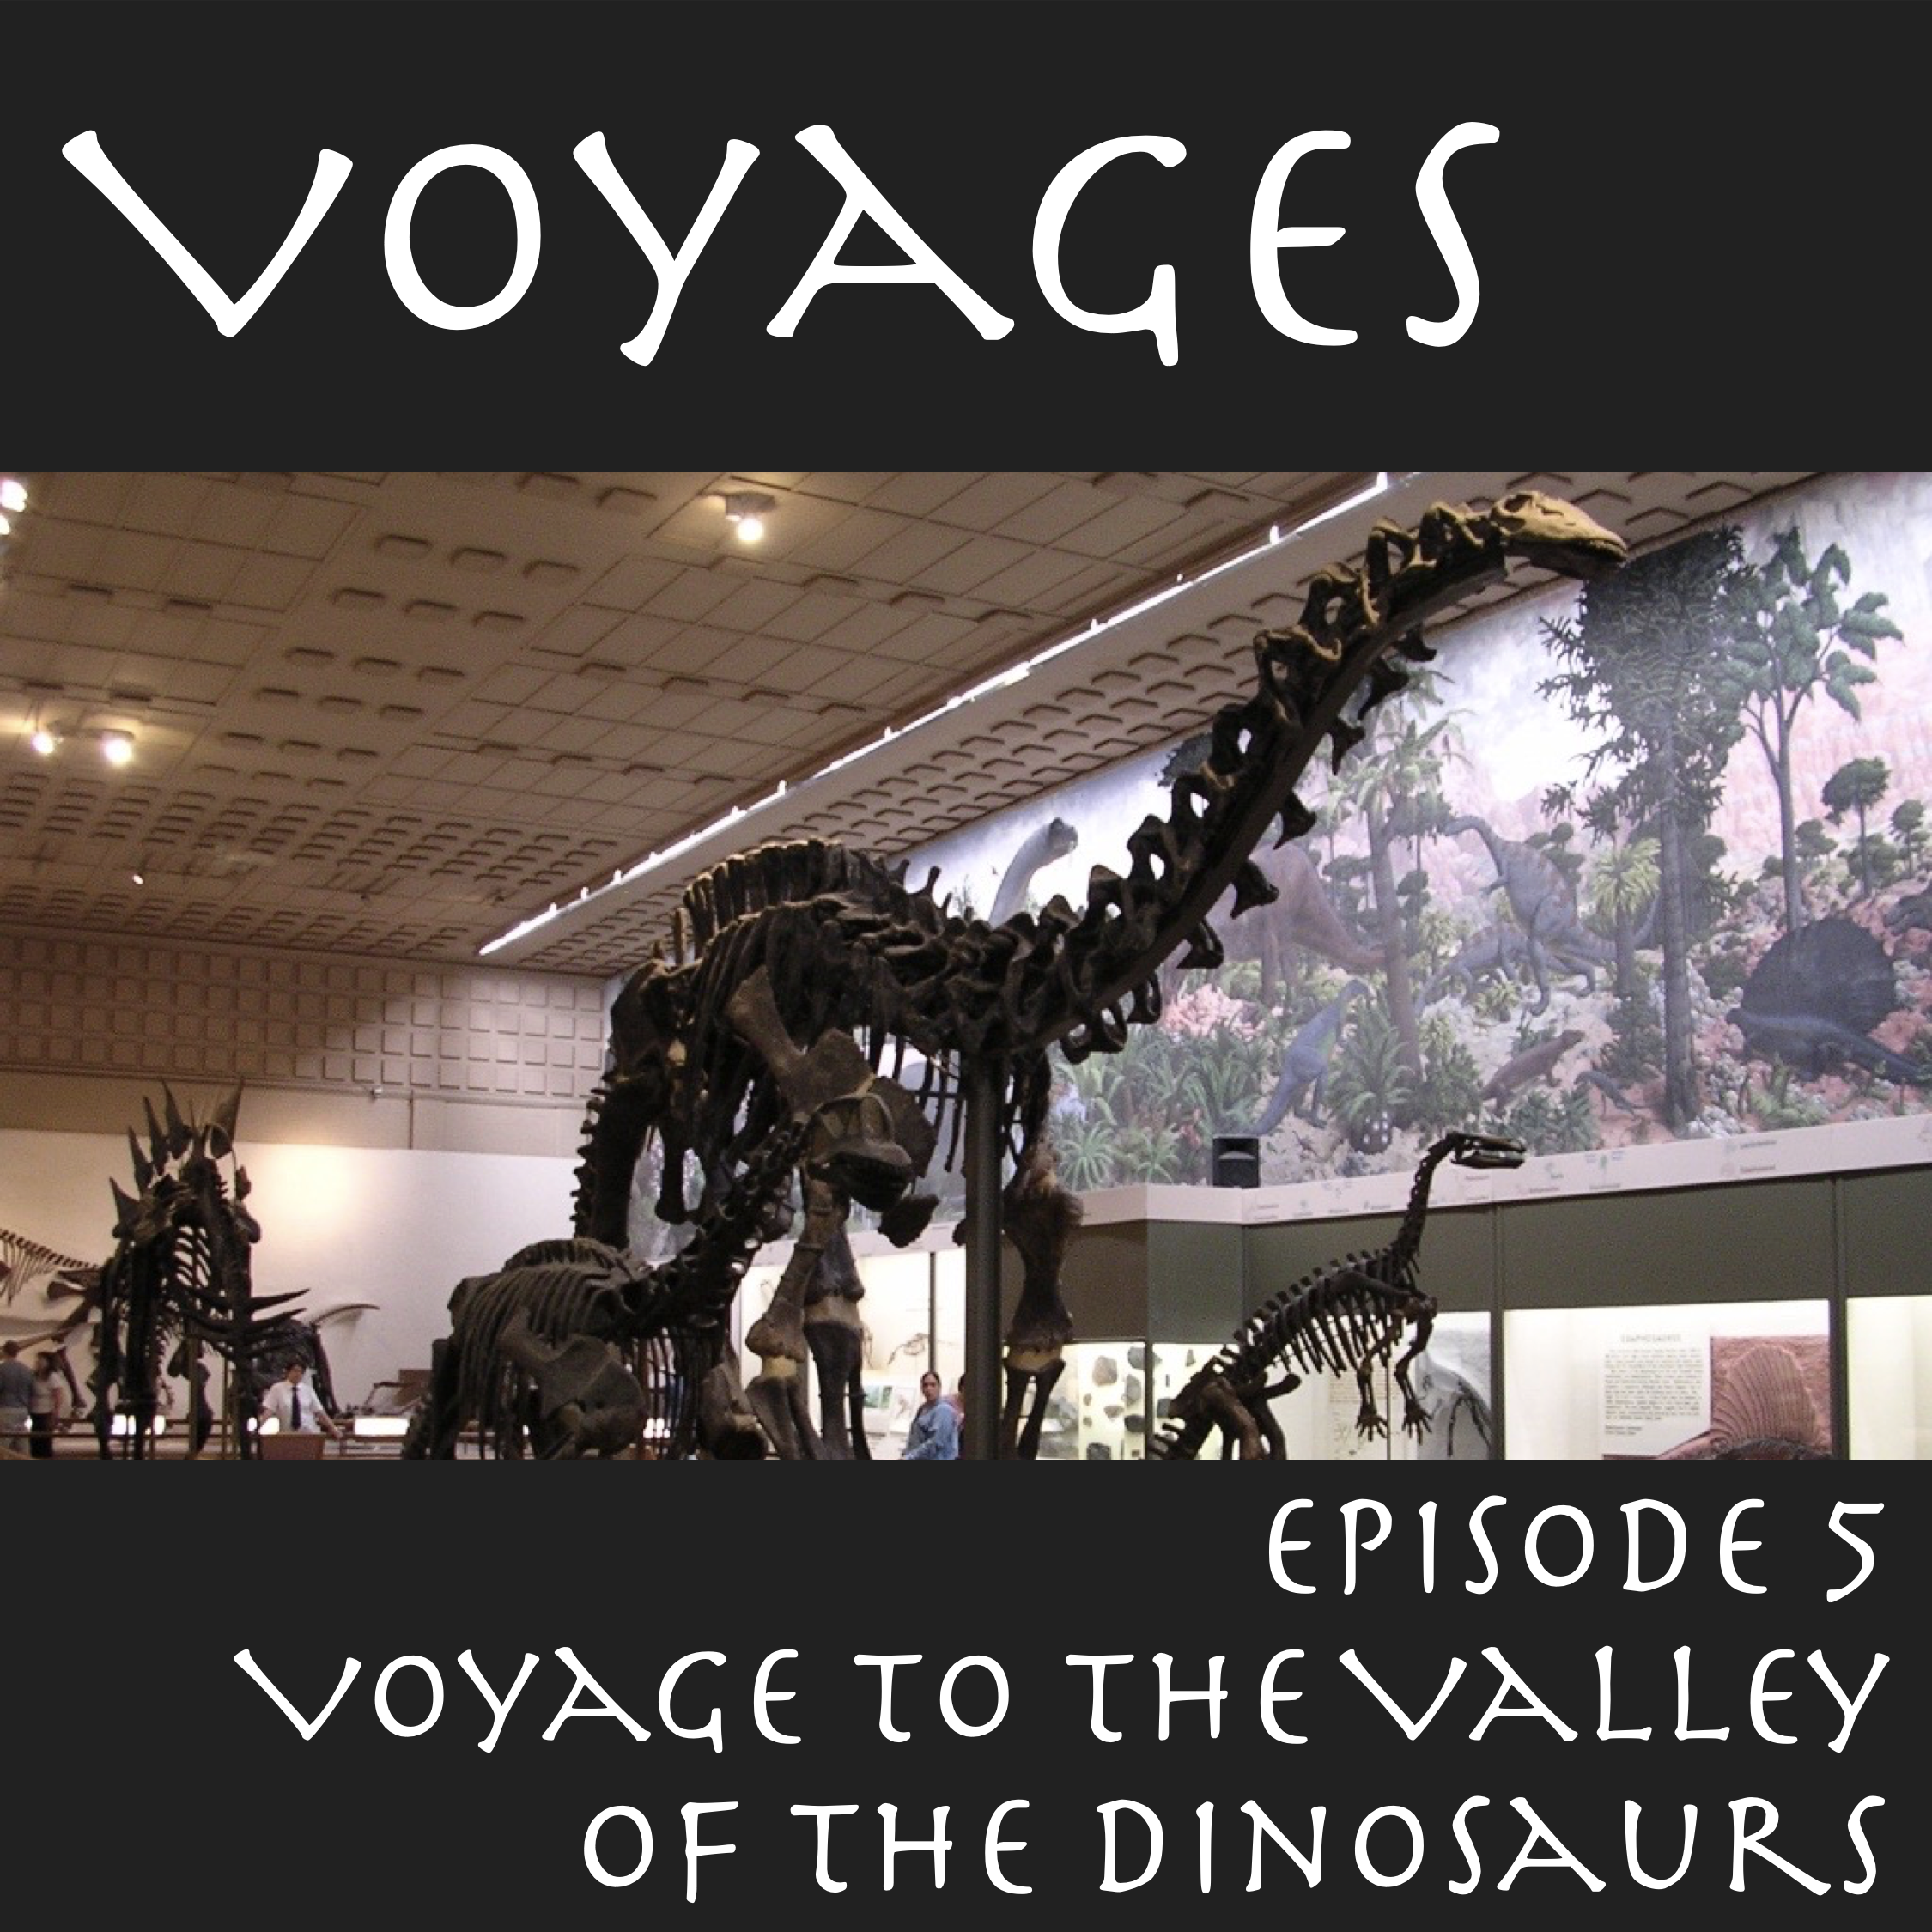 Voyage to the Valley of the Dinosaurs